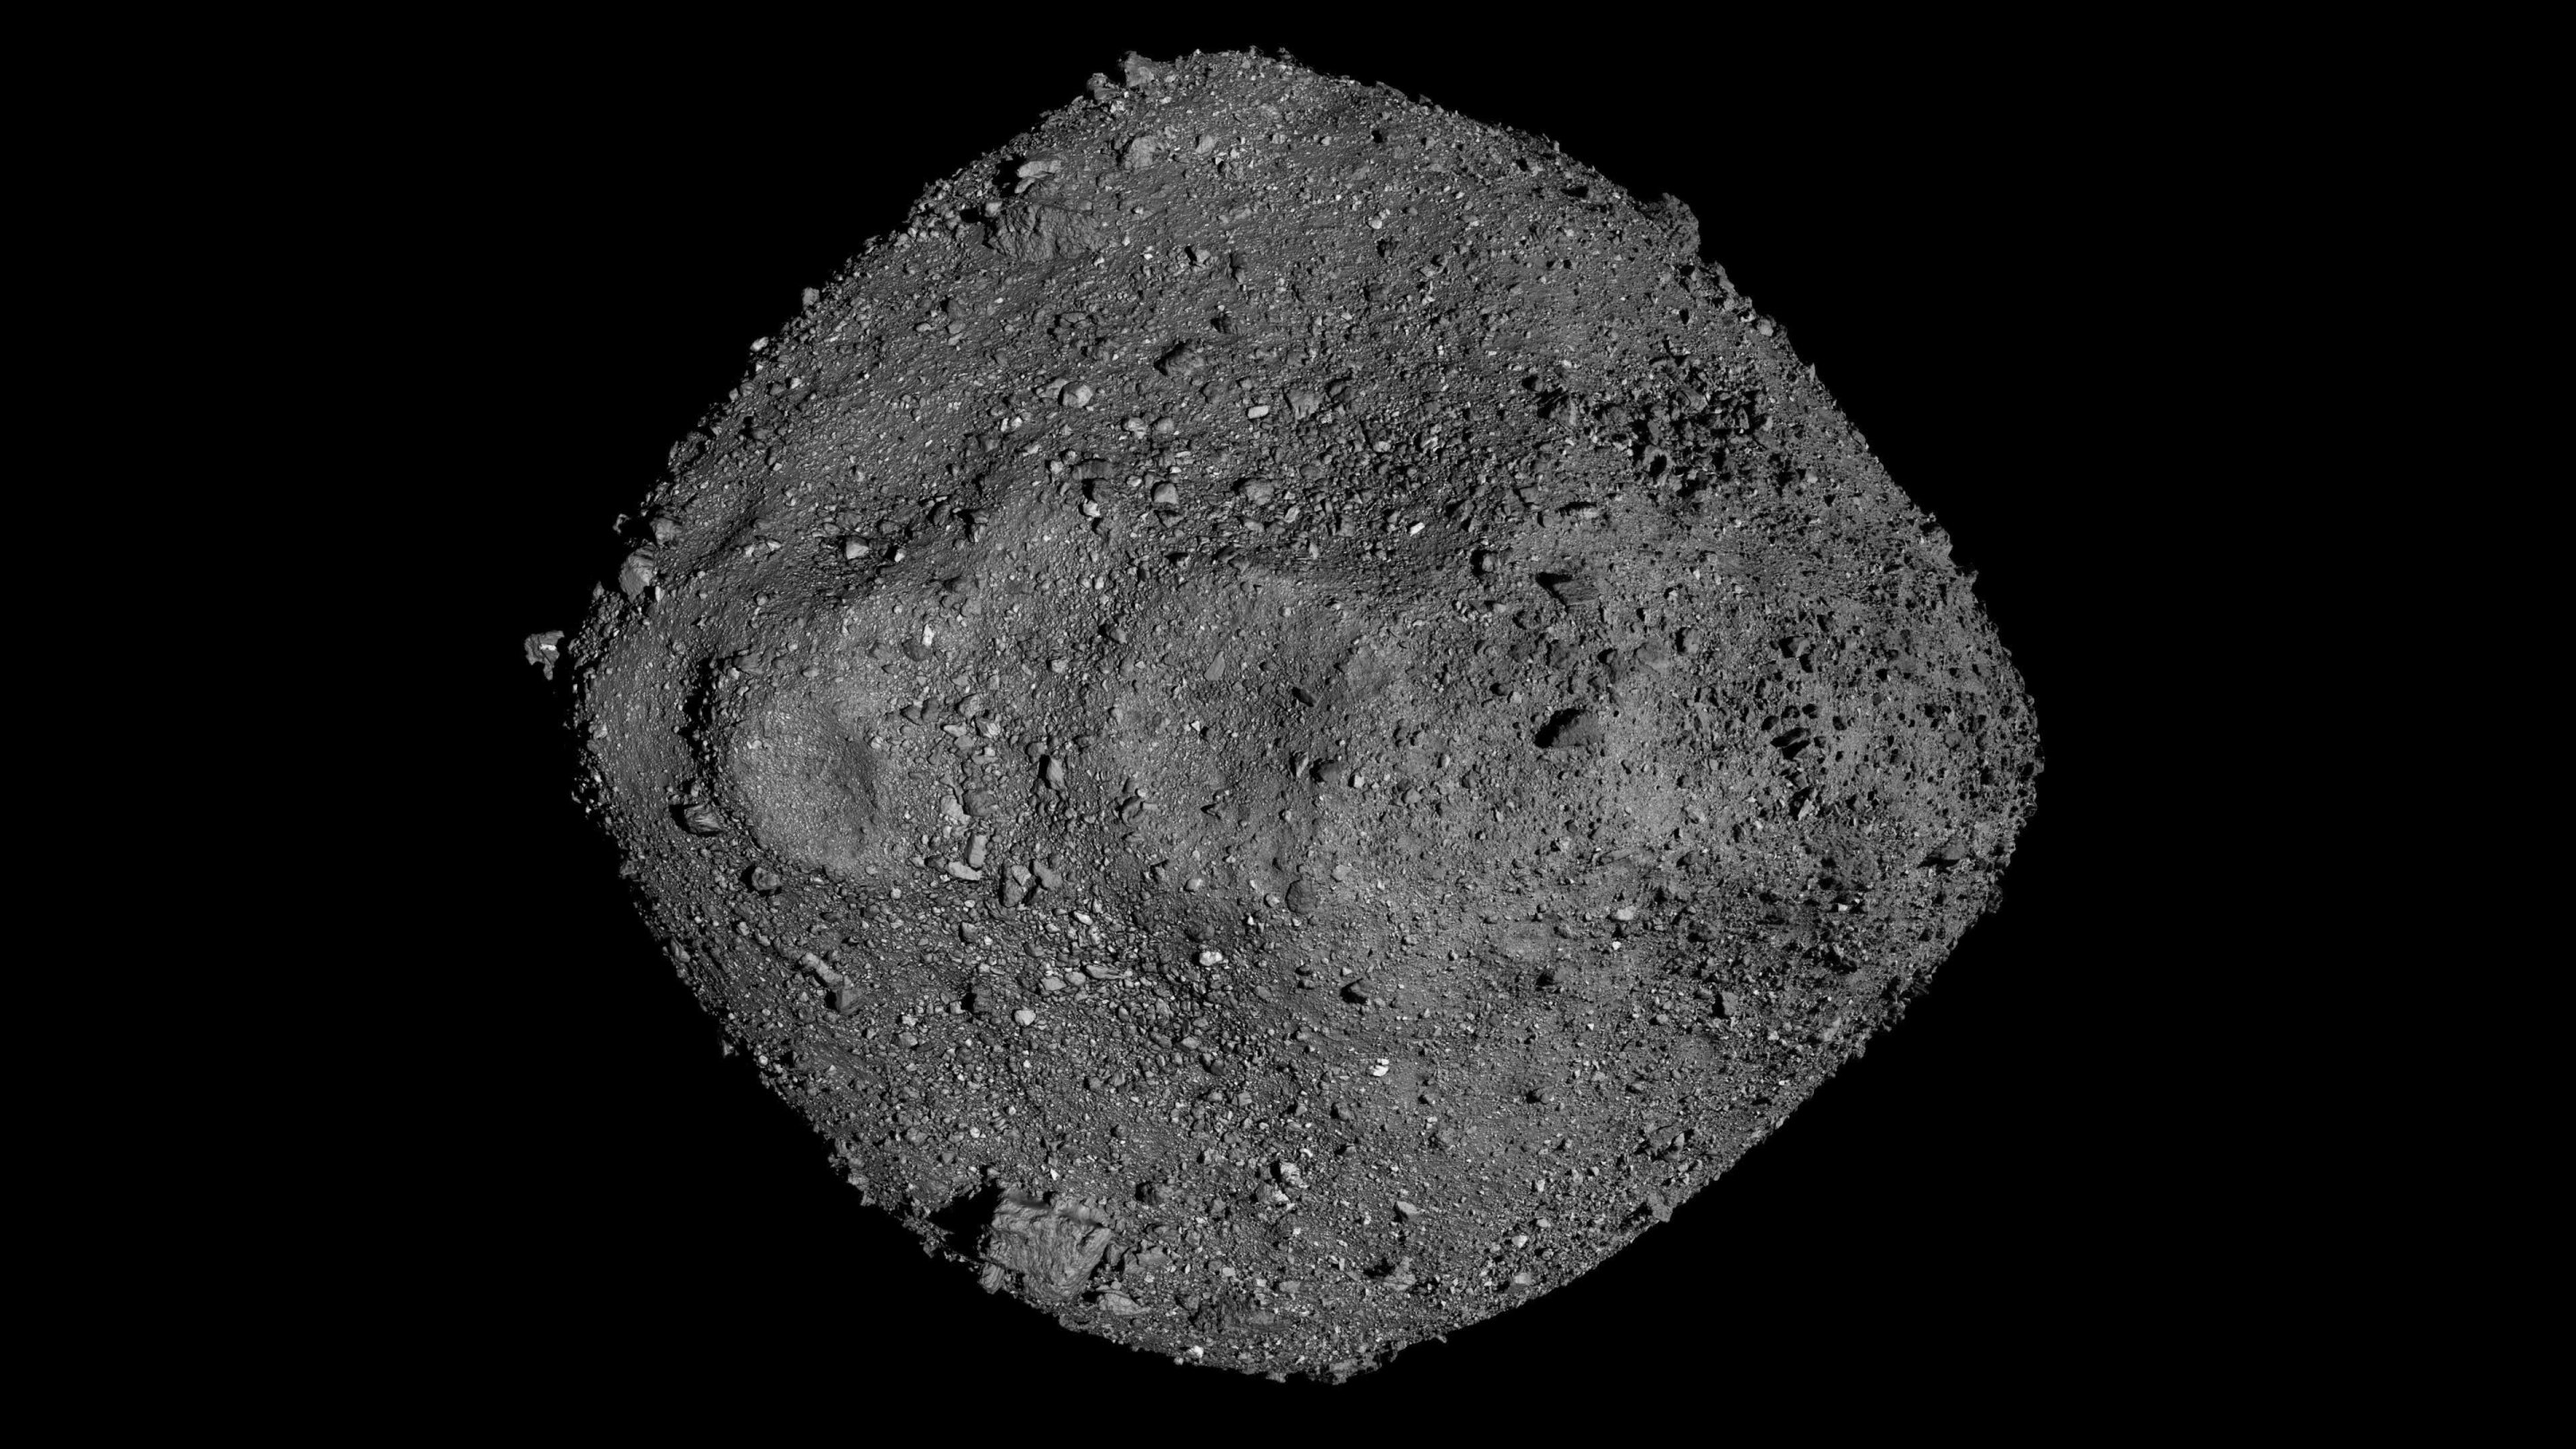 Highly porous rocks are responsible for asteroid Bennu's surprisingly craggy sur..